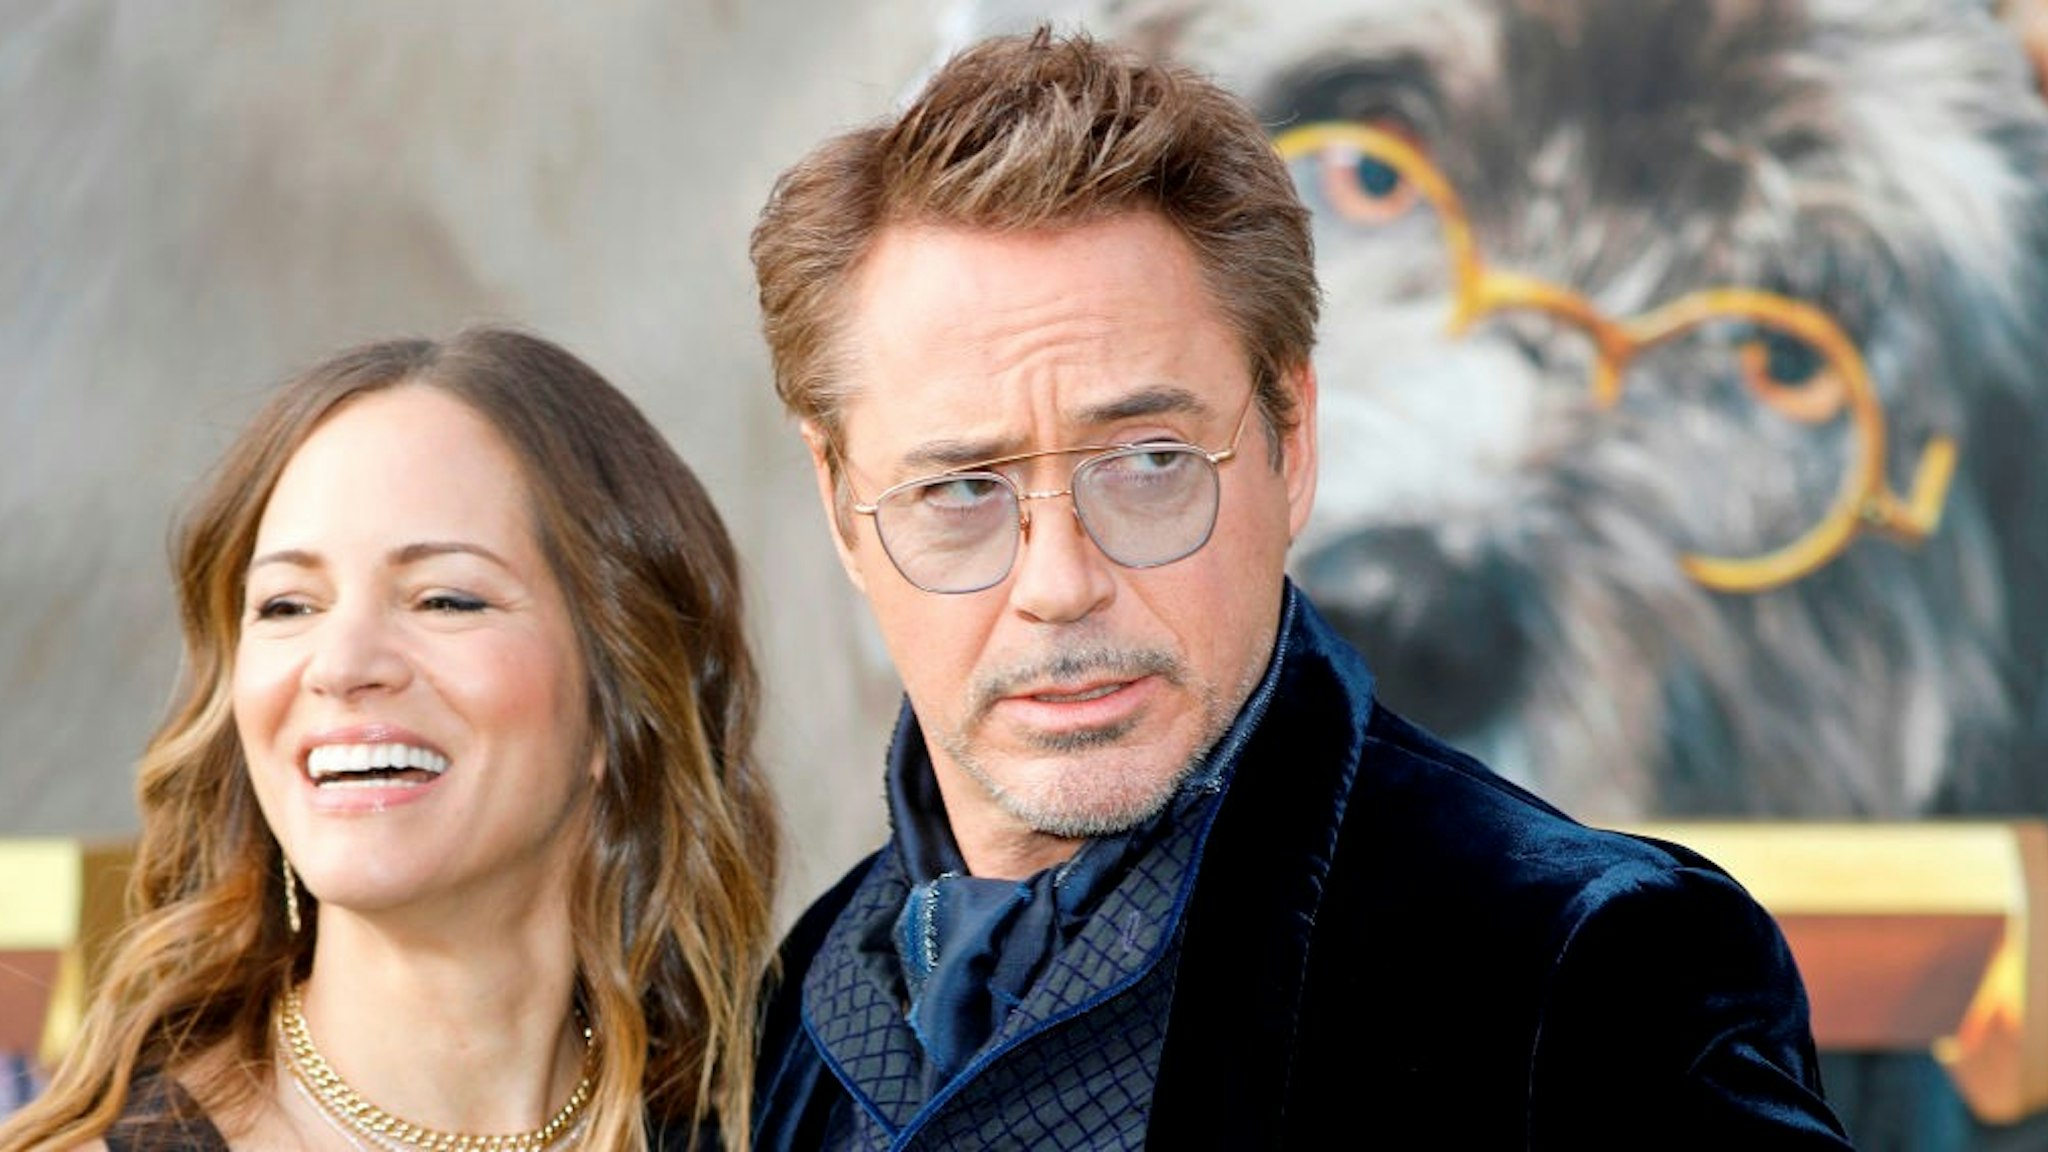 CALIFORNIA, UNITED STATES - JANUARY 11 2020: Robert Downey Jr. and Susan Downey photographed at the Premiere 'Dolittle' at Regency Village Theatre on January 11, 2020 in Westwood, California.- PHOTOGRAPH BY P. Lehman / Barcroft Media (Photo credit should read